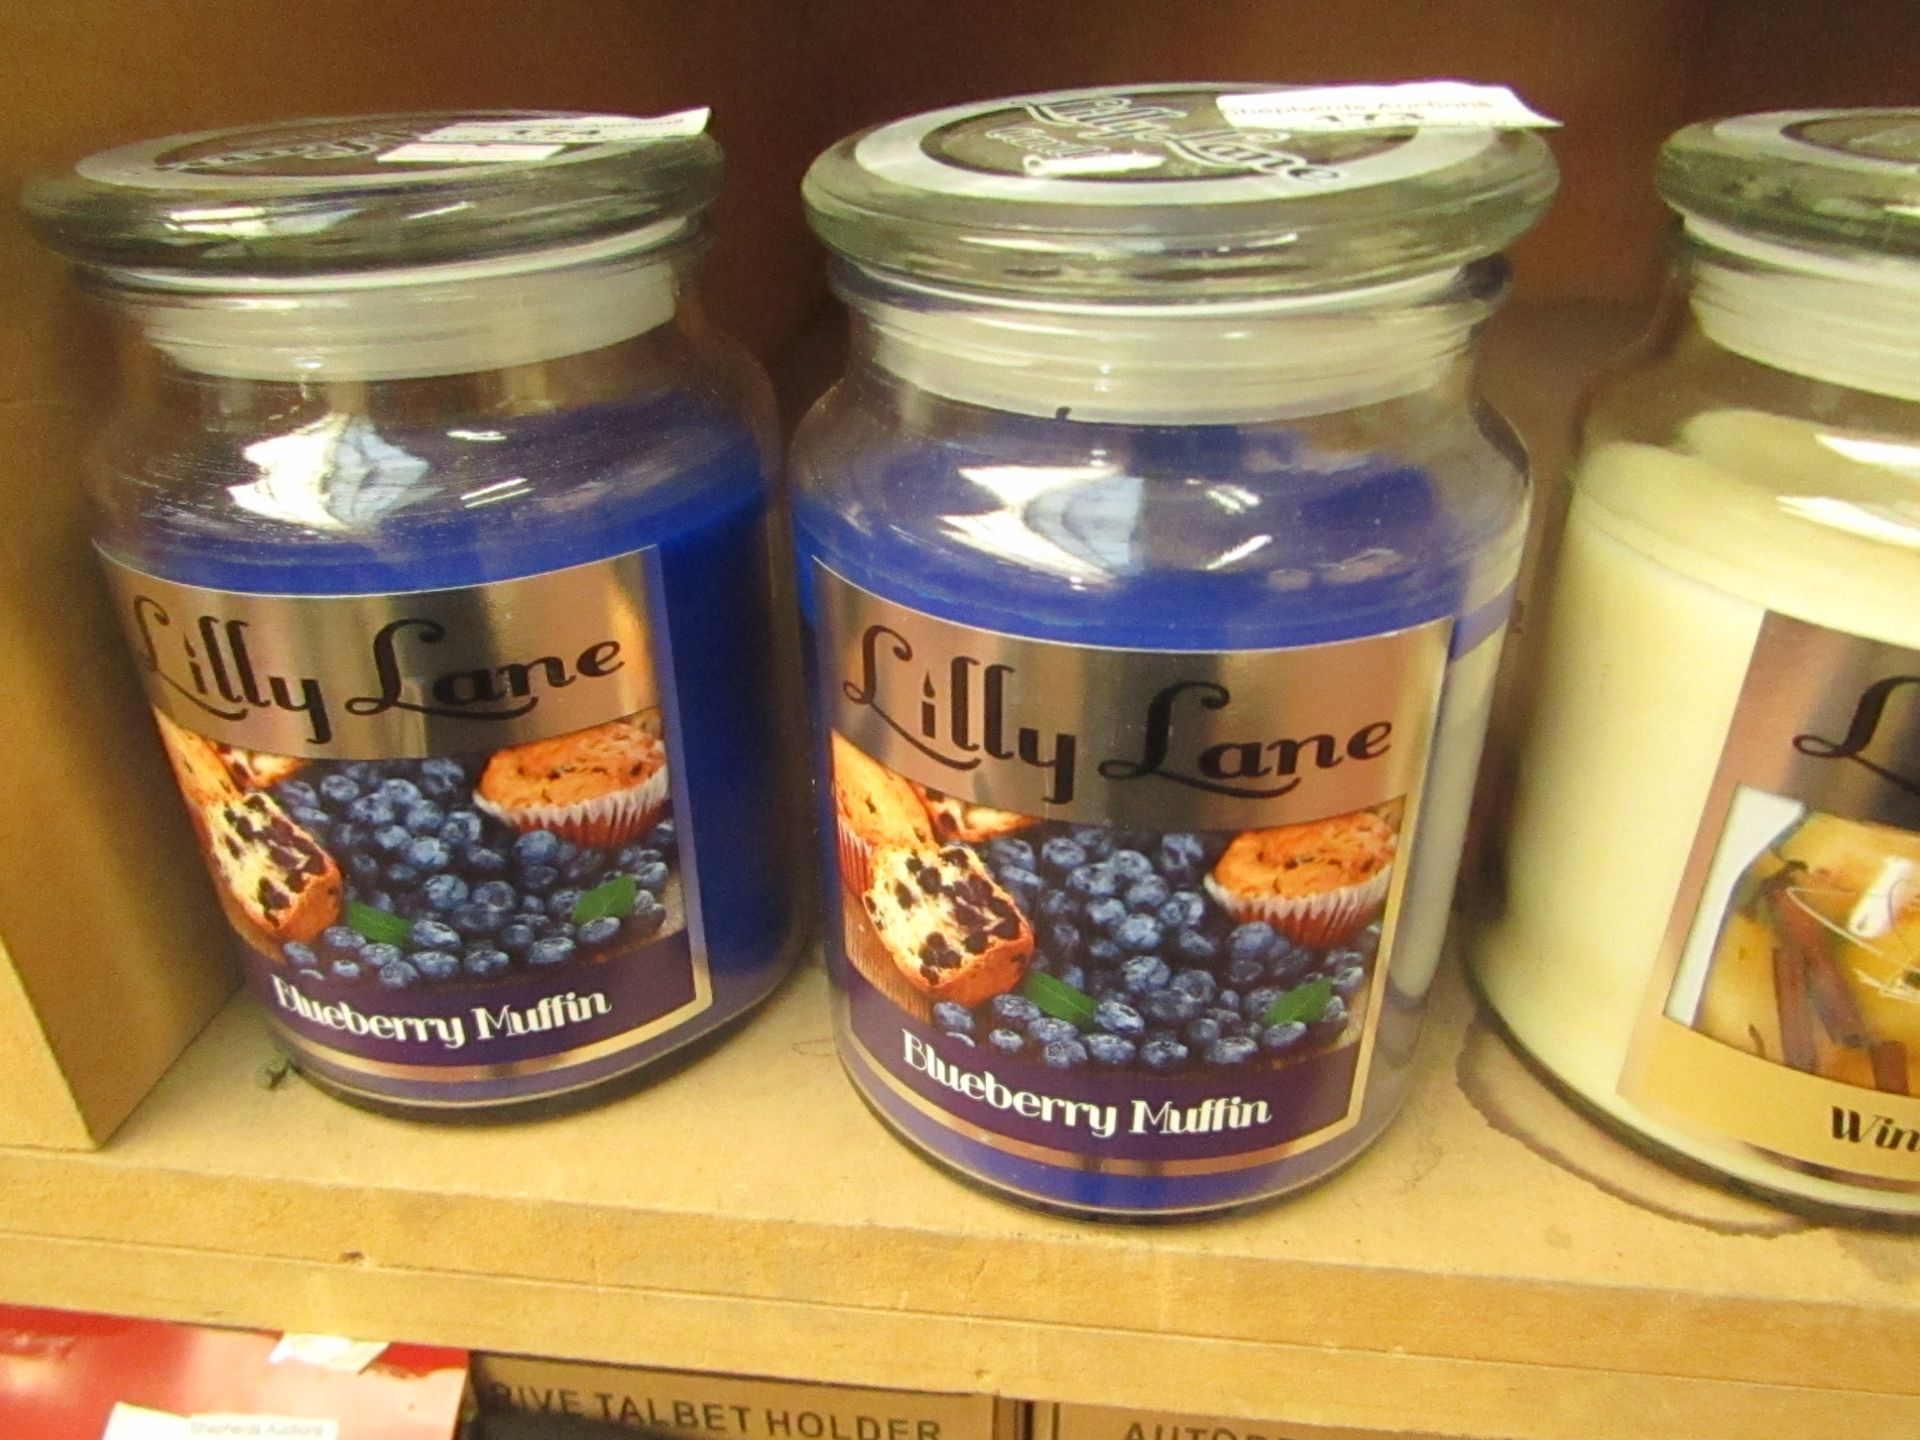 Lilly Lane Scented Candle. 18oz each. Blueberry Muffin Scent. New